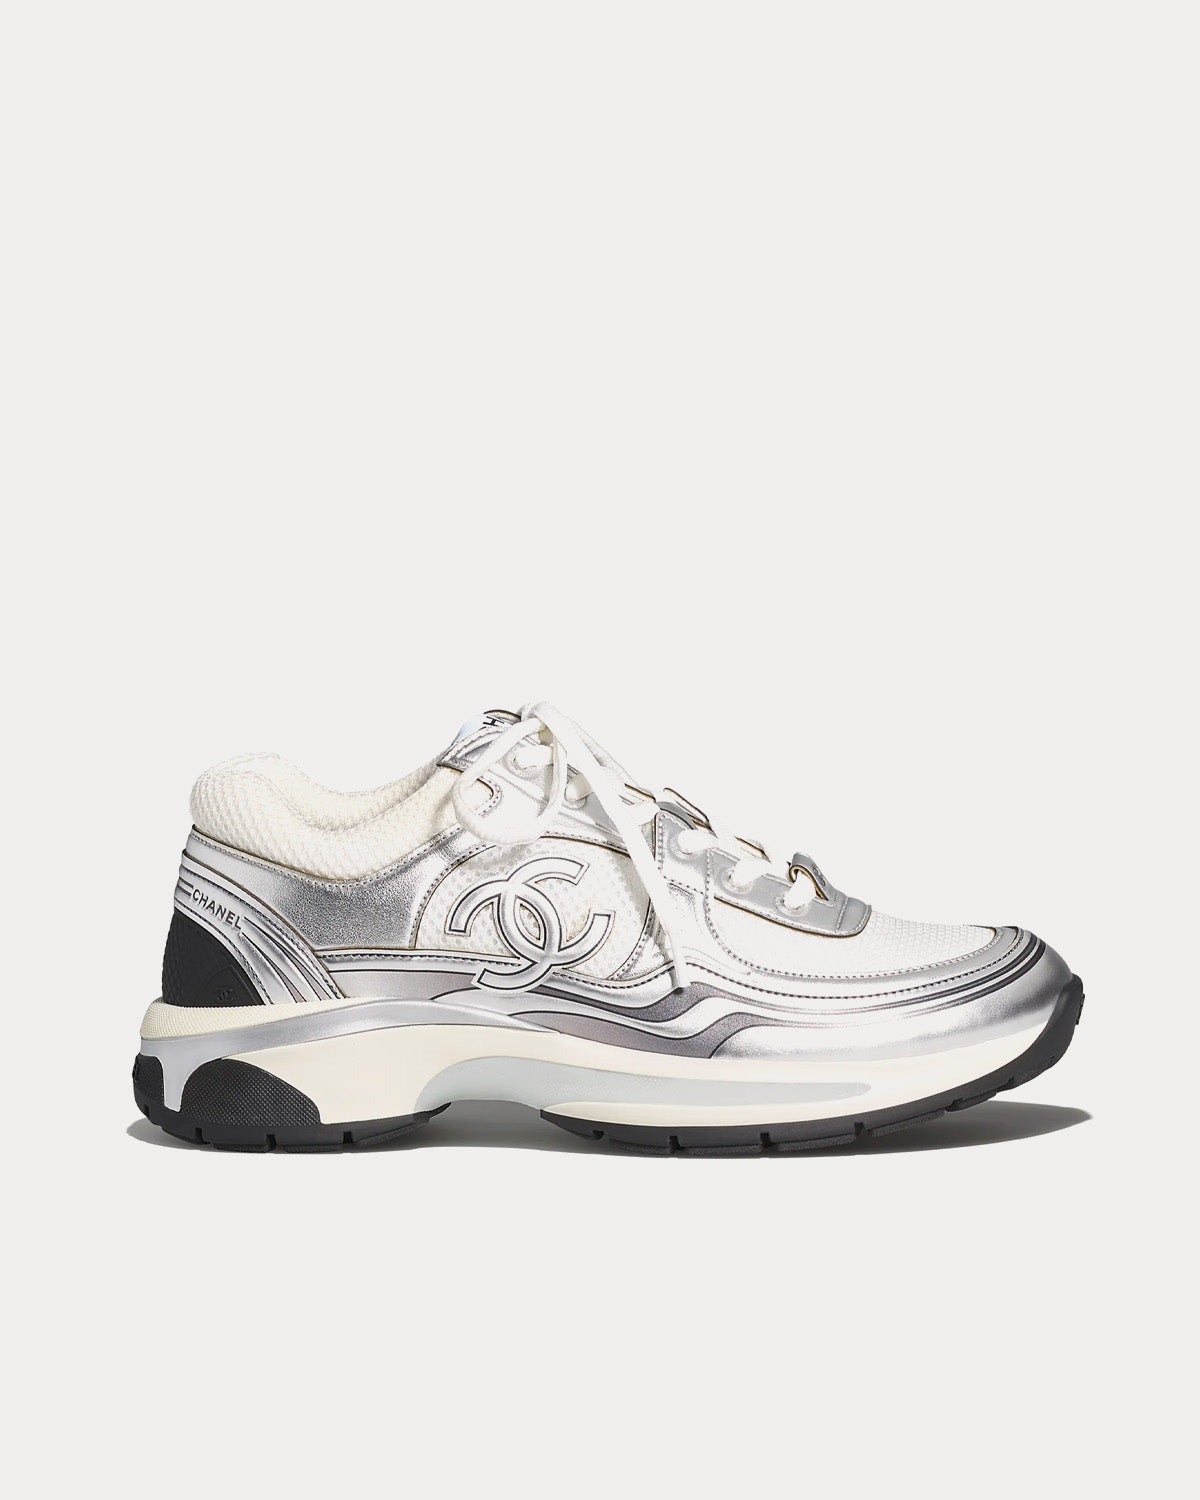 Chanel Fabric & Laminated White & Silver Low Top Sneakers - Sneak